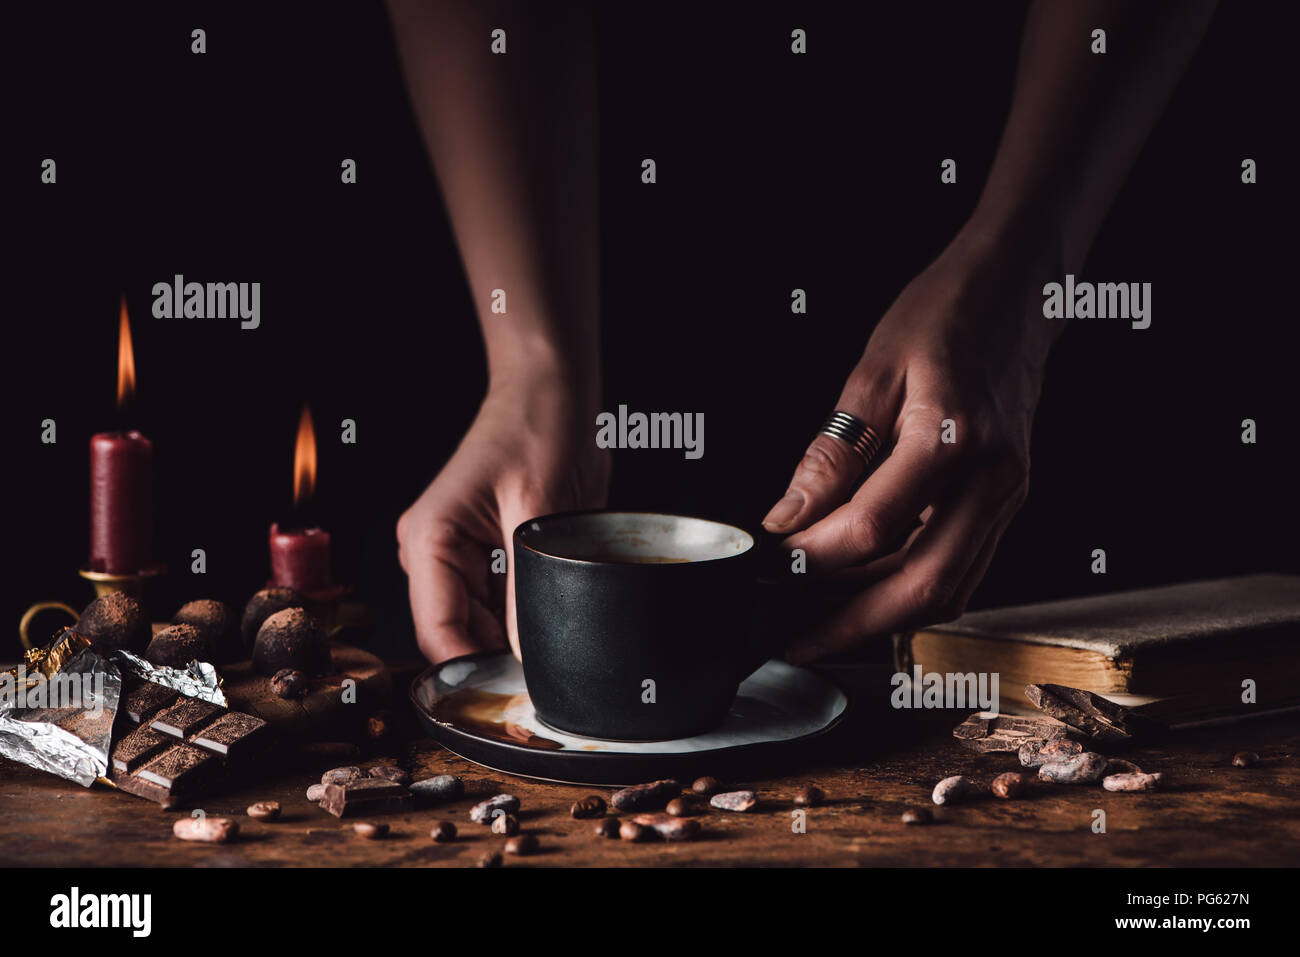 cropped shot of woman holding cup of coffee at wooden table with chocolate, truffles, coffee grains, candles and book on black background Stock Photo